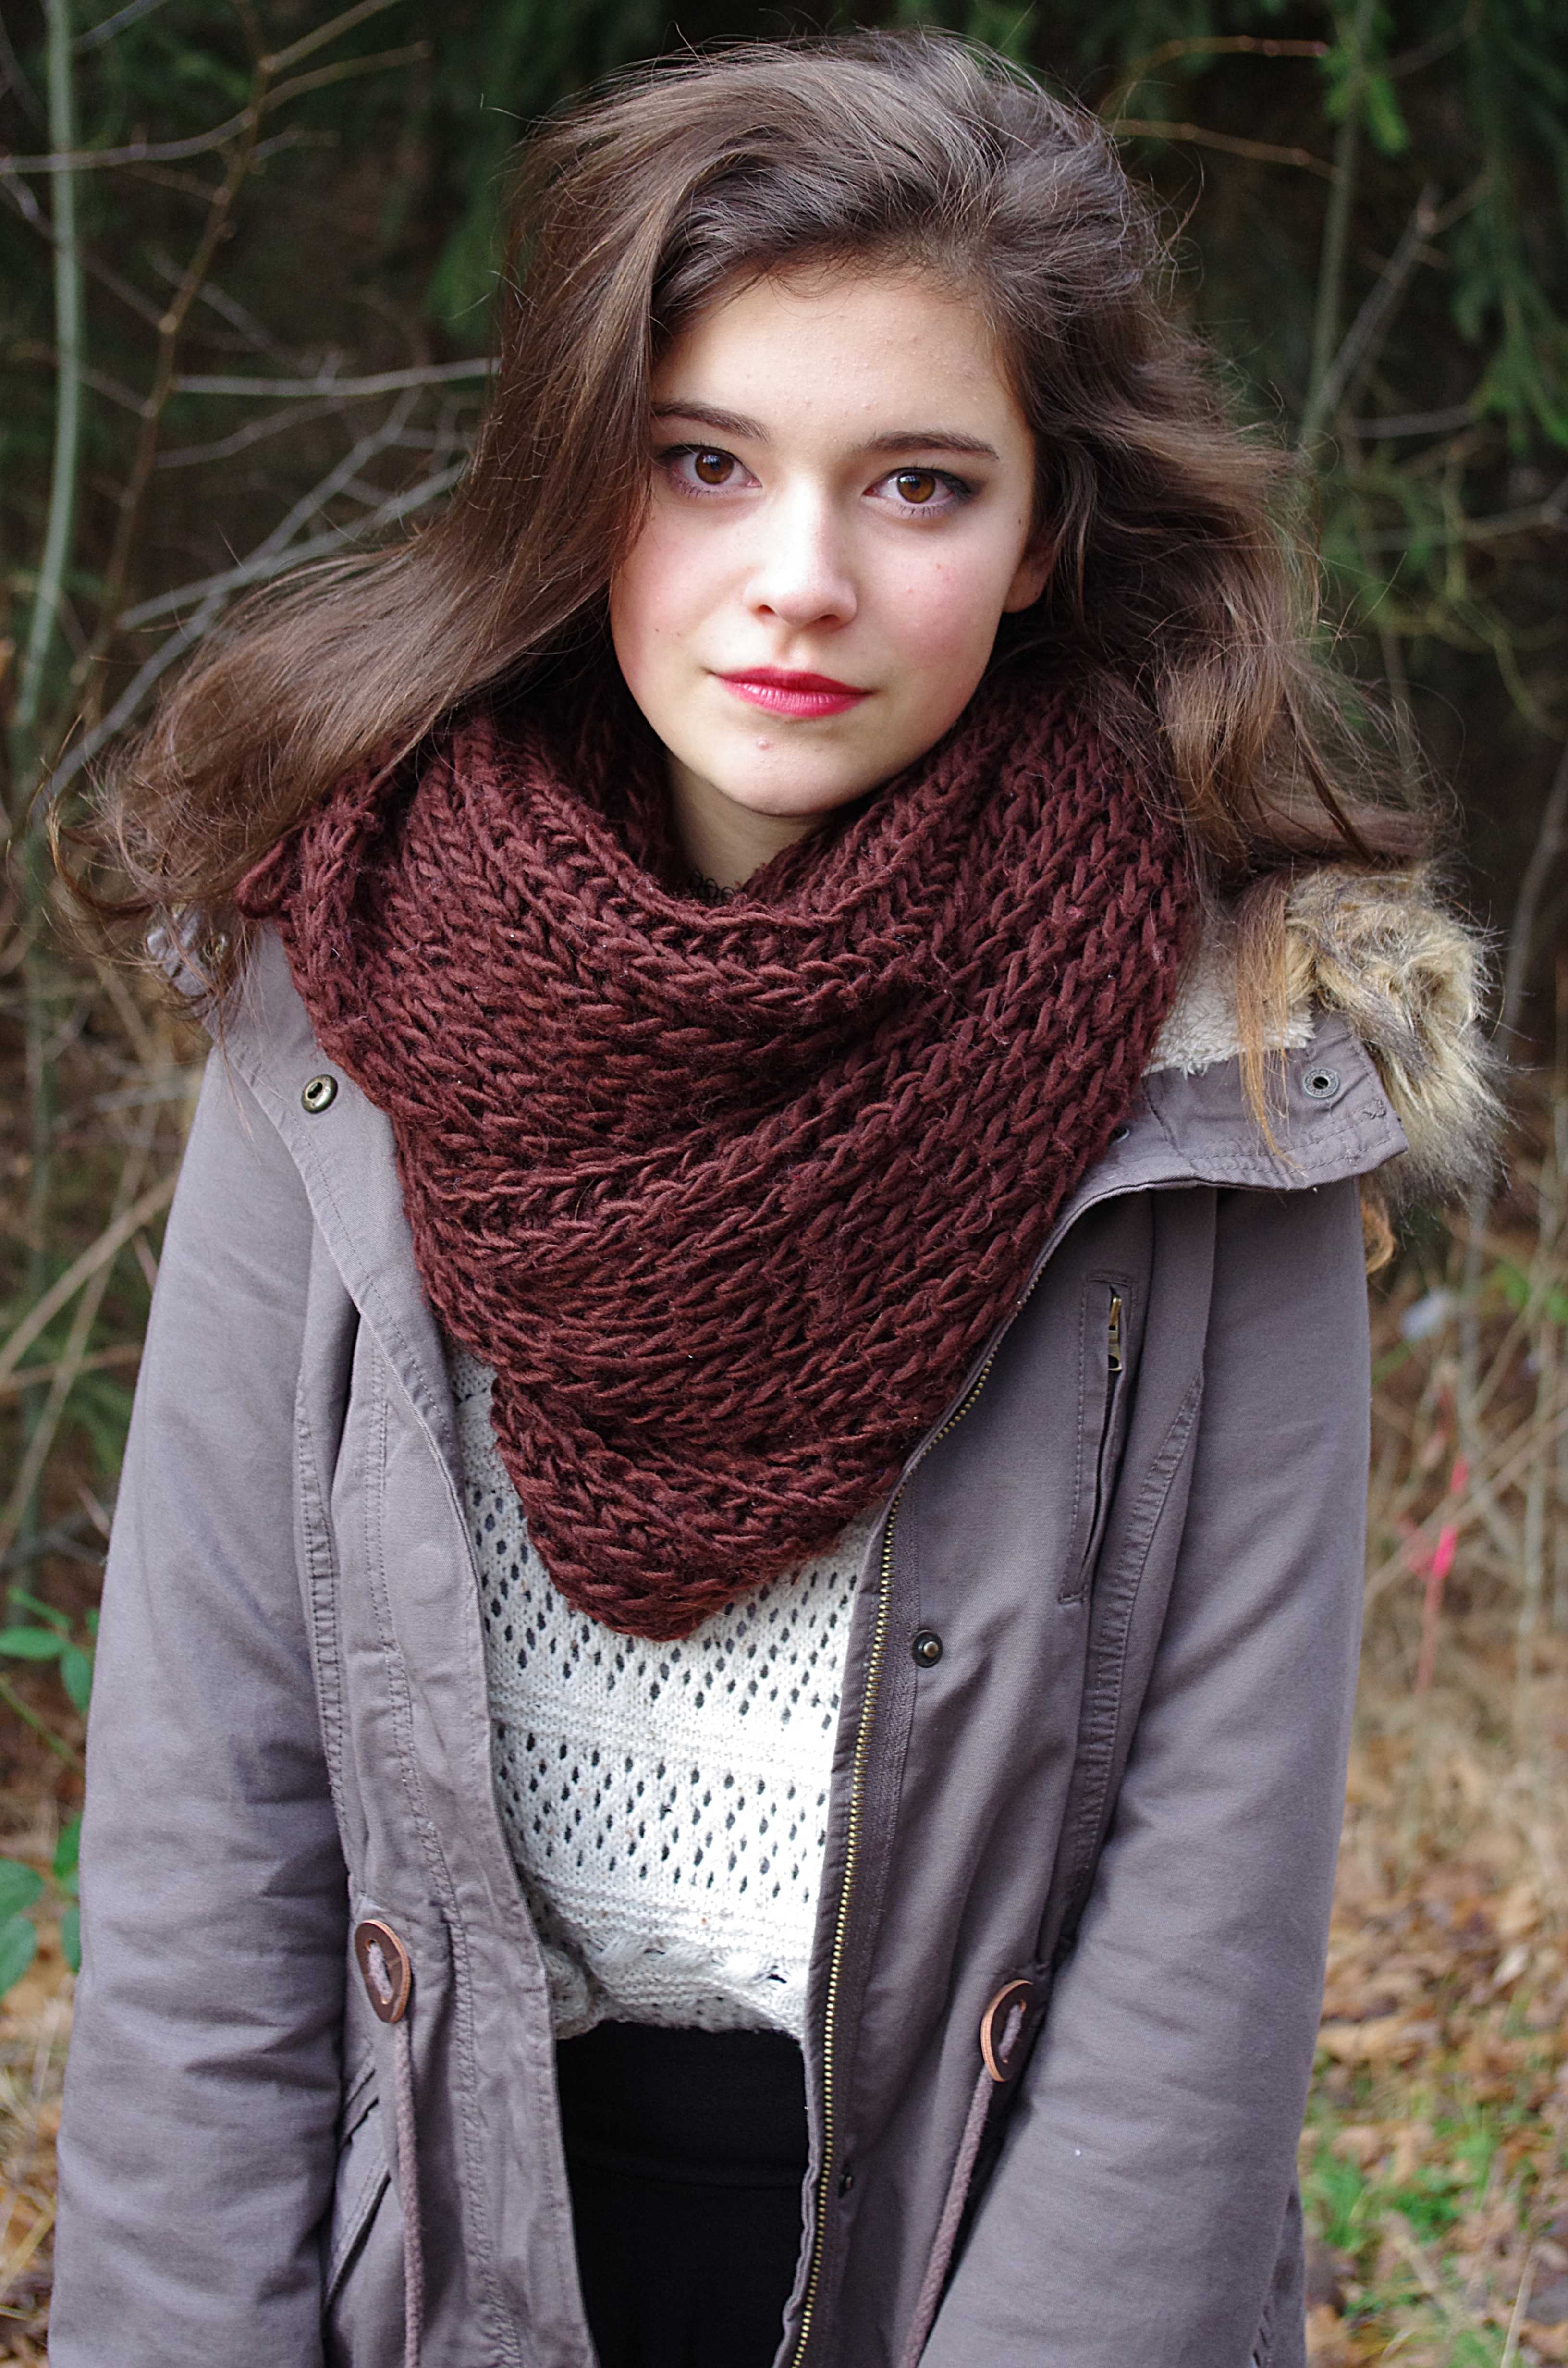 Dark-haired girl in a scarf